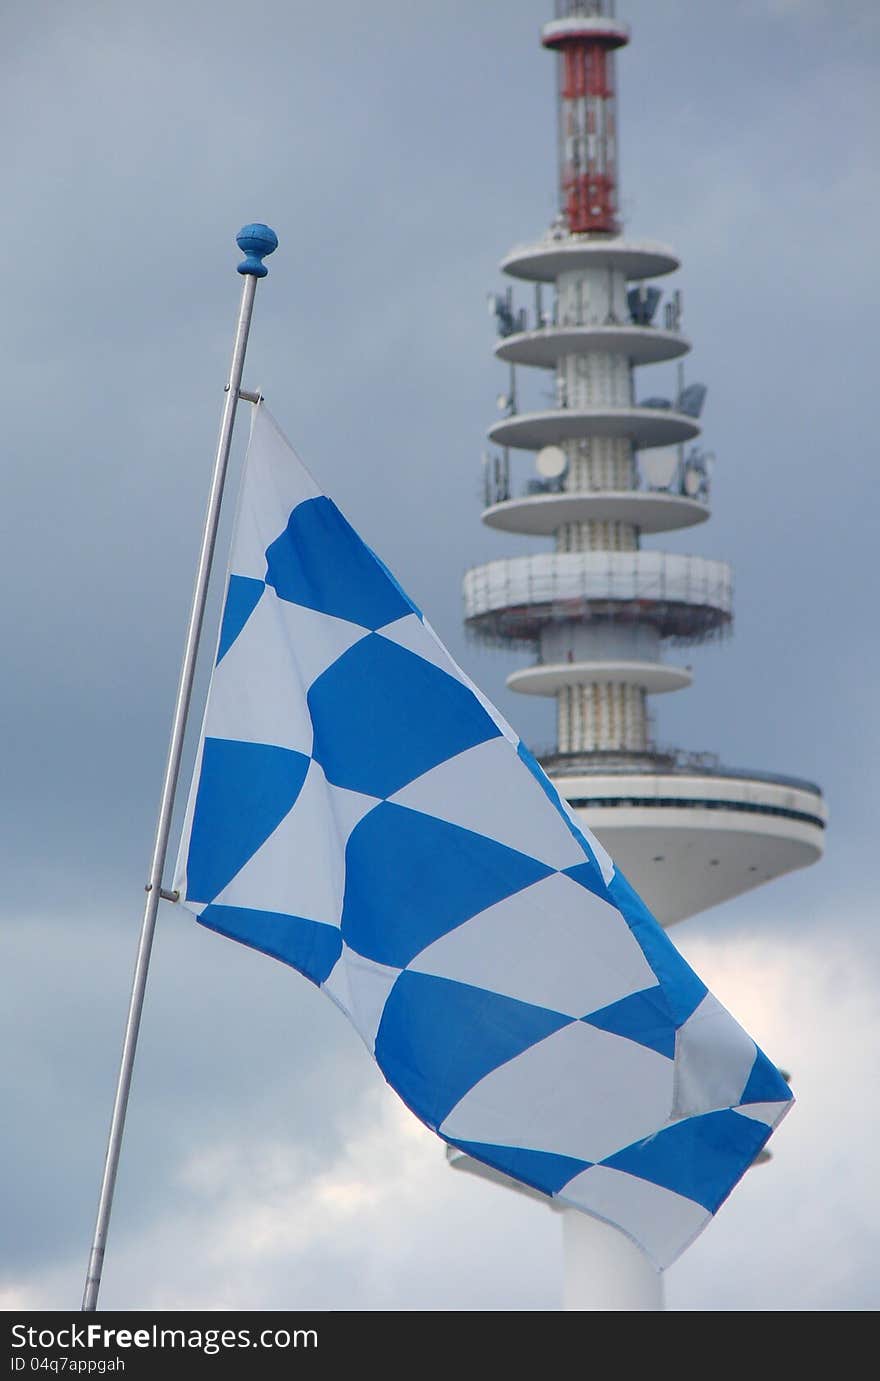 White-blue-checkered-flag bayern as symbol of october fixed and globalization of media communications by means of television transmission. White-blue-checkered-flag bayern as symbol of october fixed and globalization of media communications by means of television transmission